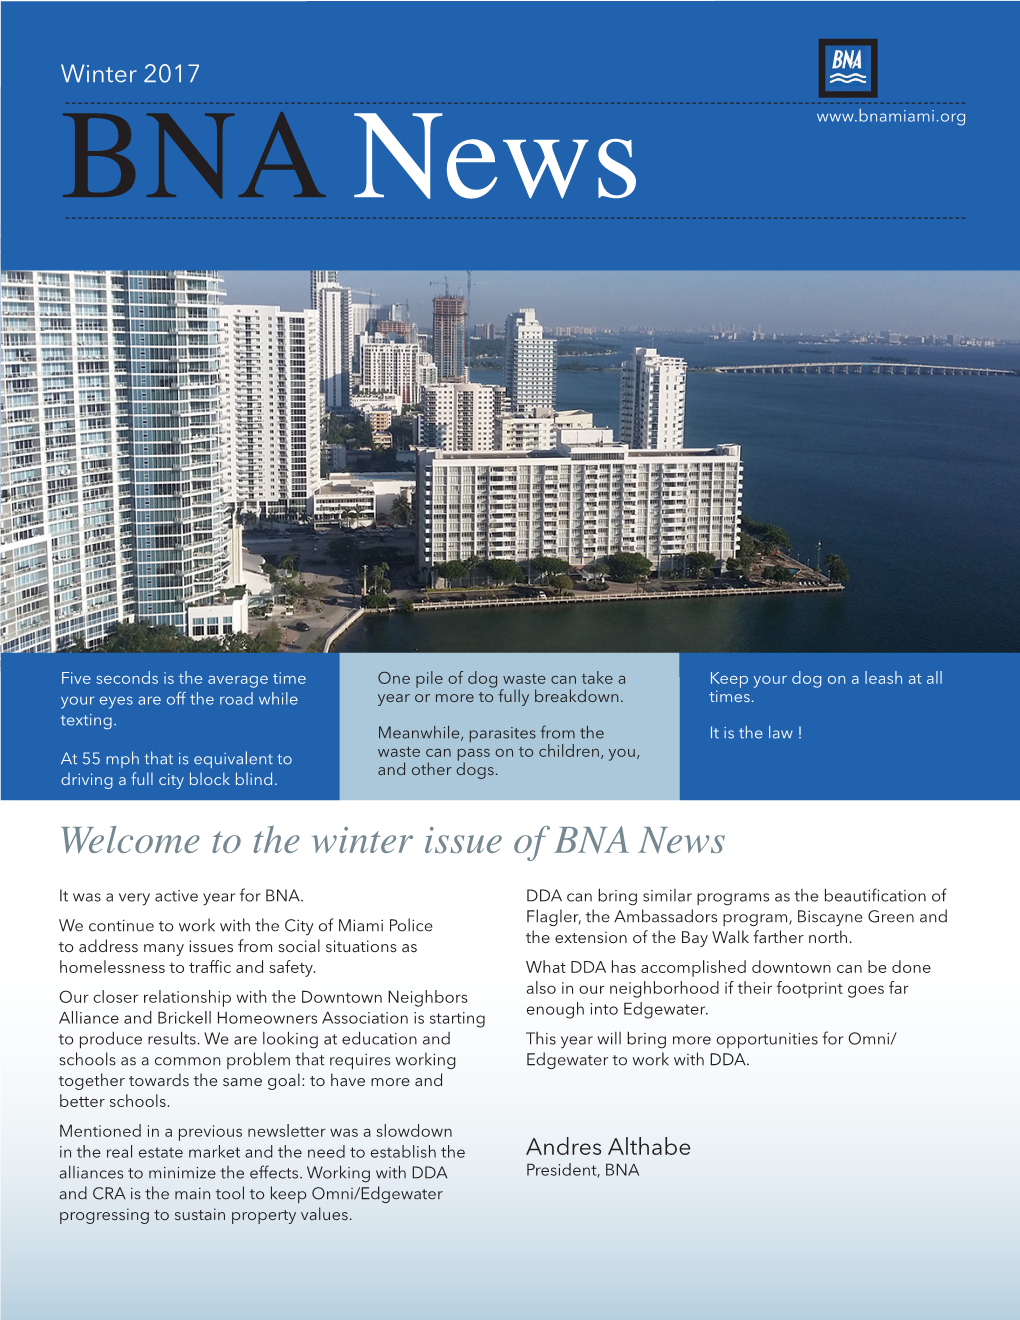 The Winter Issue of BNA News